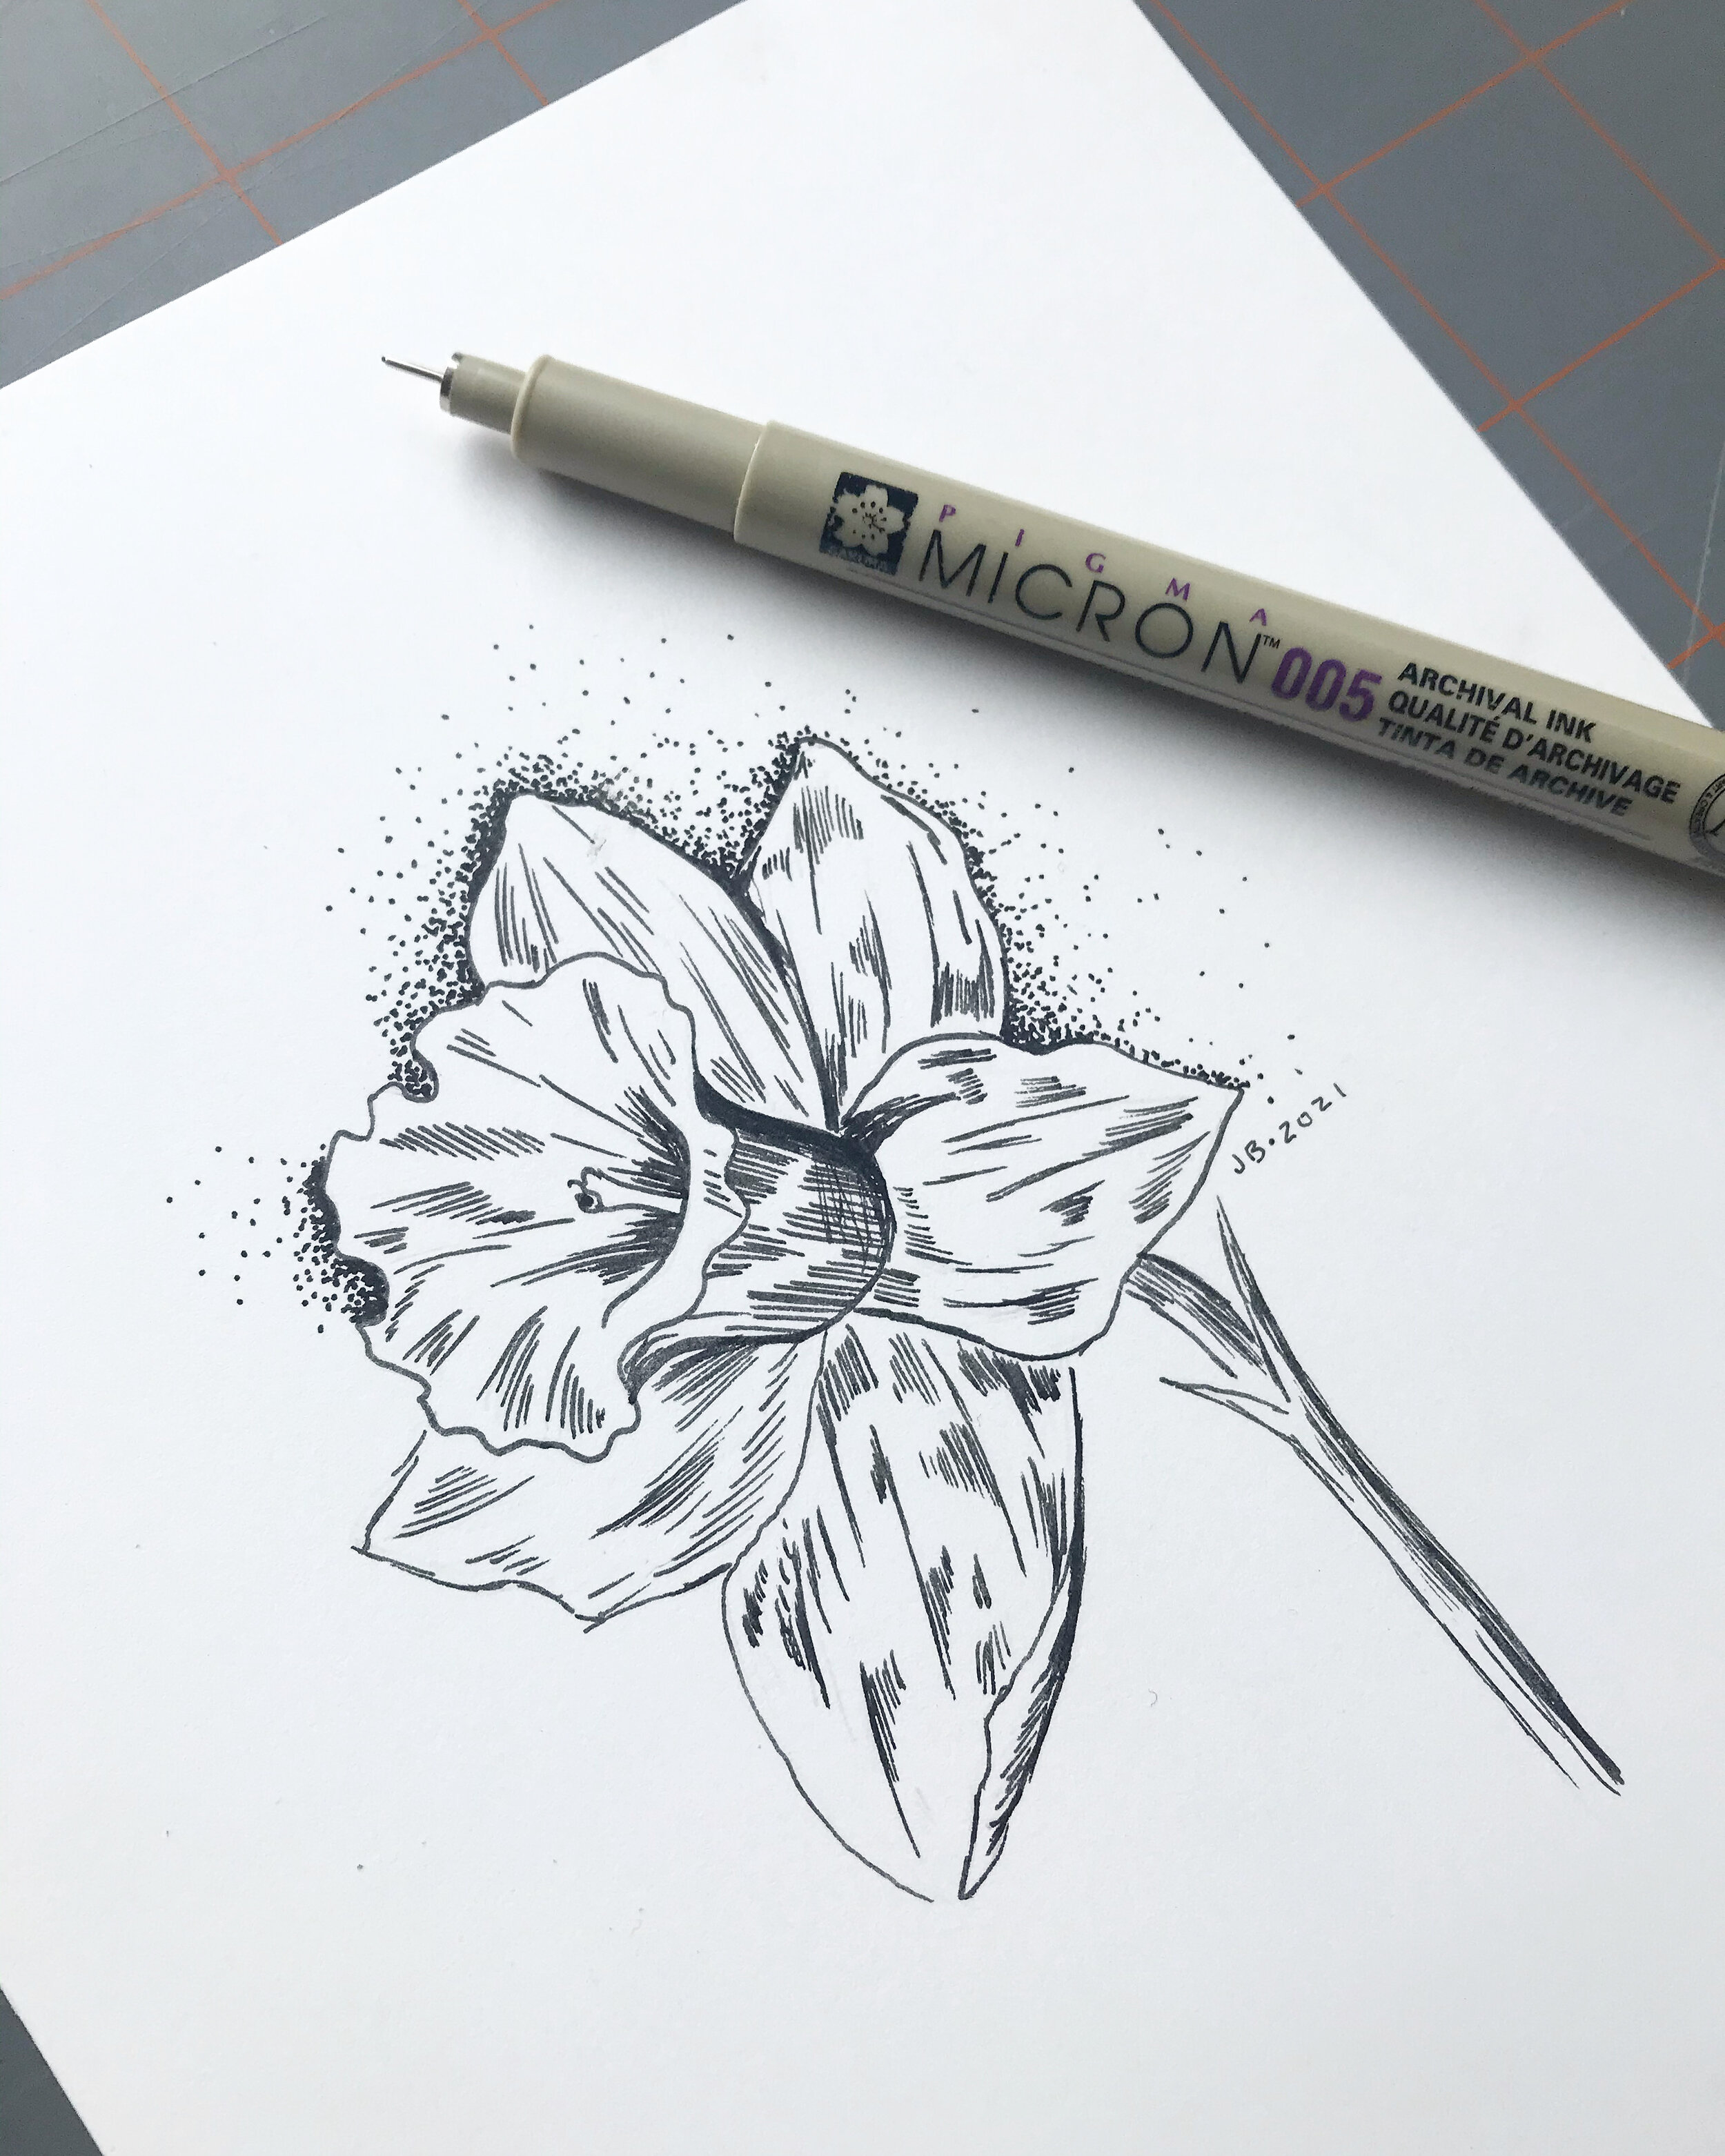 How to Draw Flowers With Brush Pen / Brush Pen Floral / Quick & Easy Flower  Drawing / Brush Pen Art - YouTube